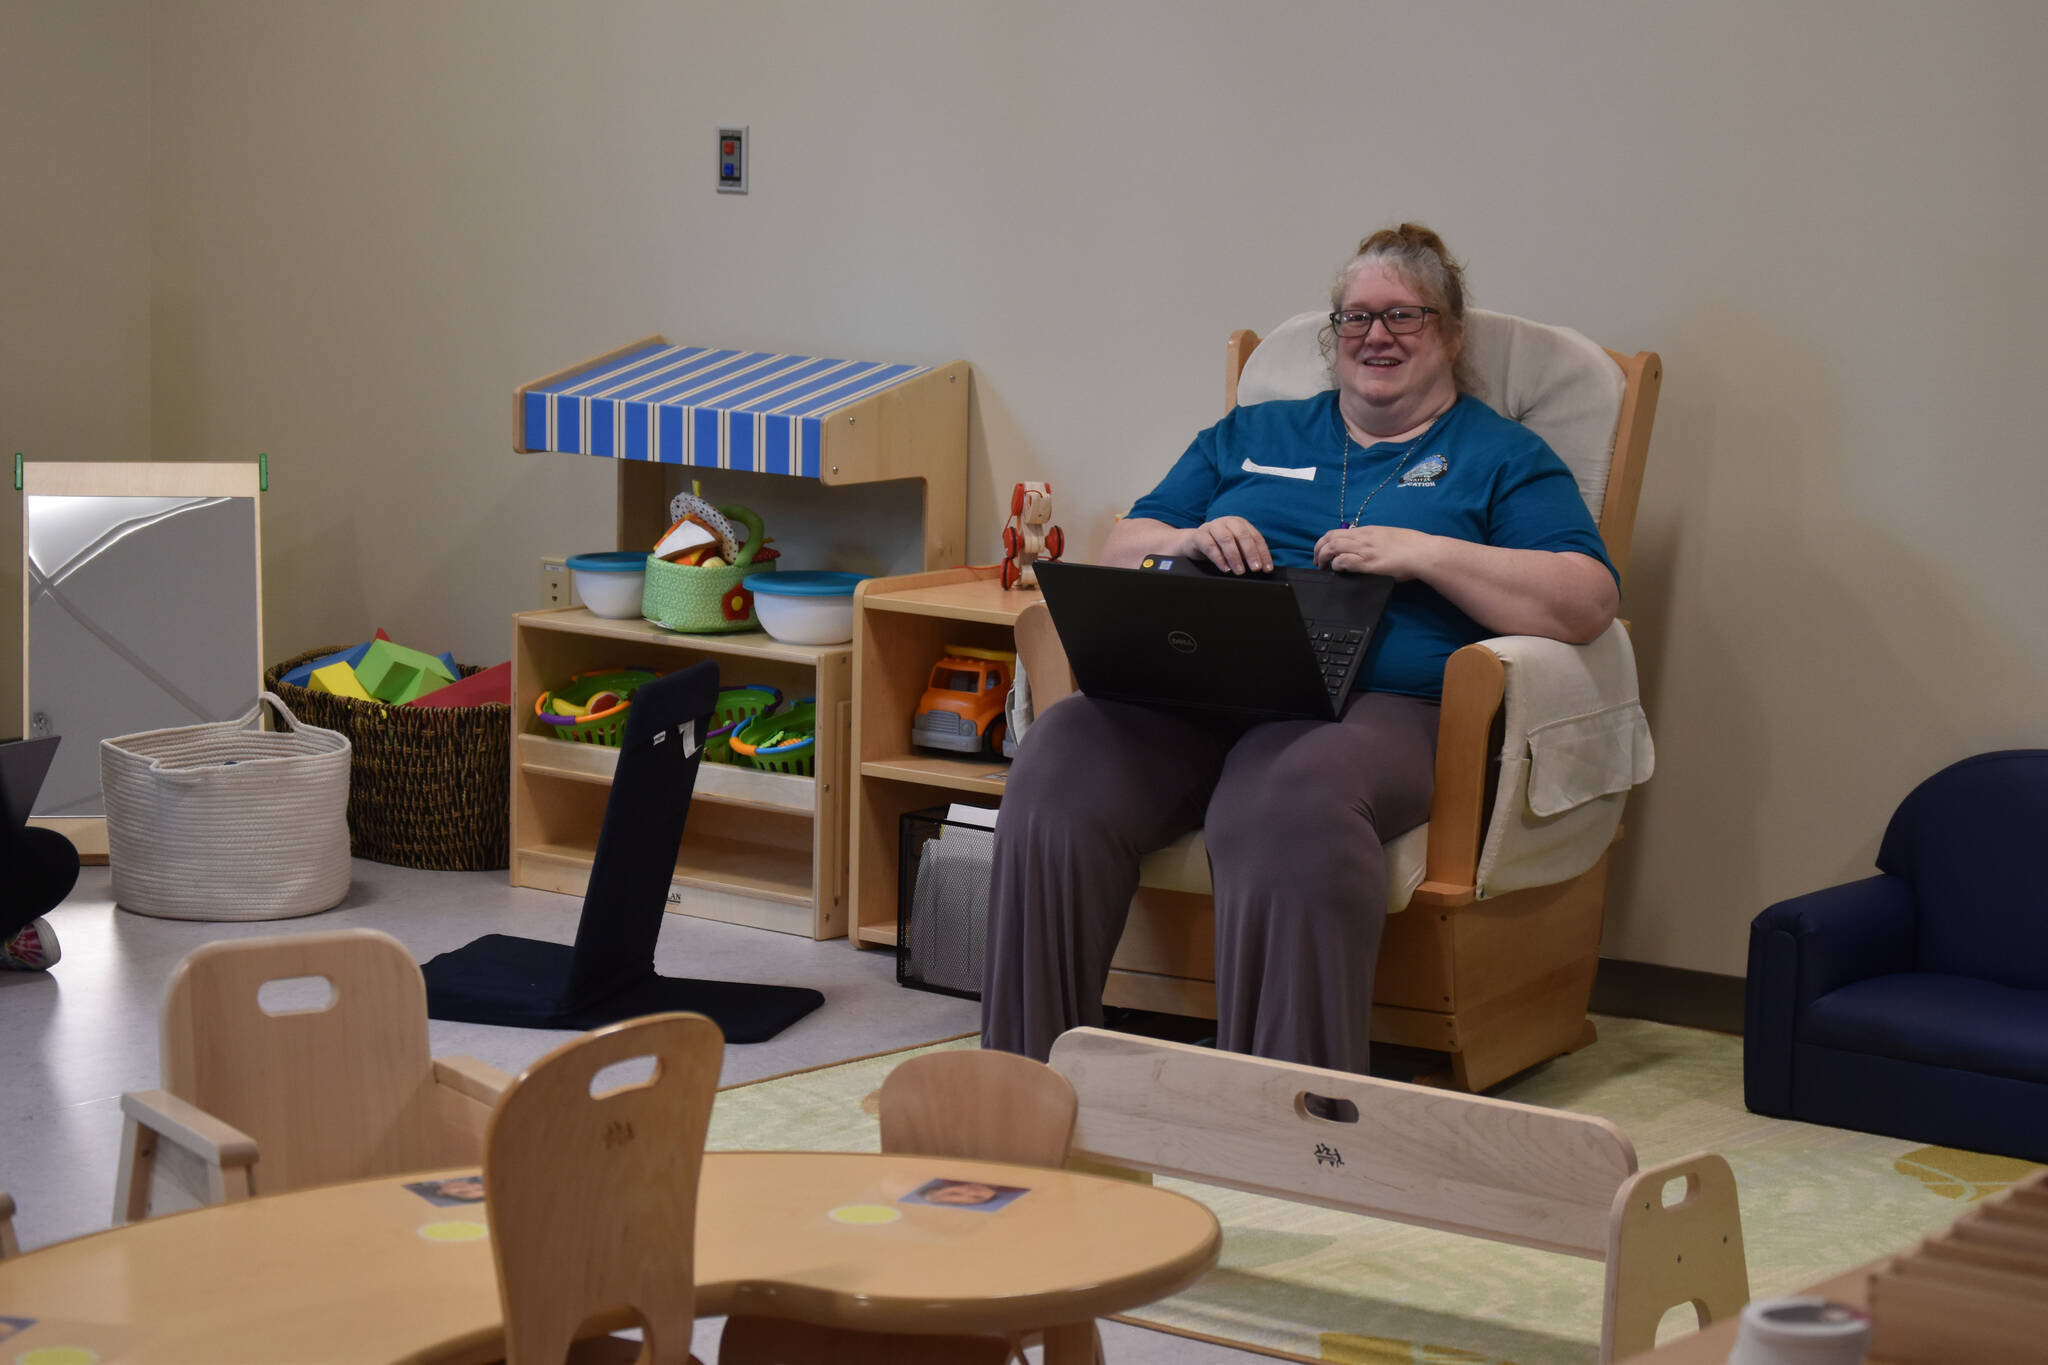 One of the educators for the toddler program at the Kahtnuht’ana Duhdeldiht Campus prepares in a classroom on Thursday, Sept. 1, 2022, in Kenai, Alaska. (Jake Dye/Peninsula Clarion)